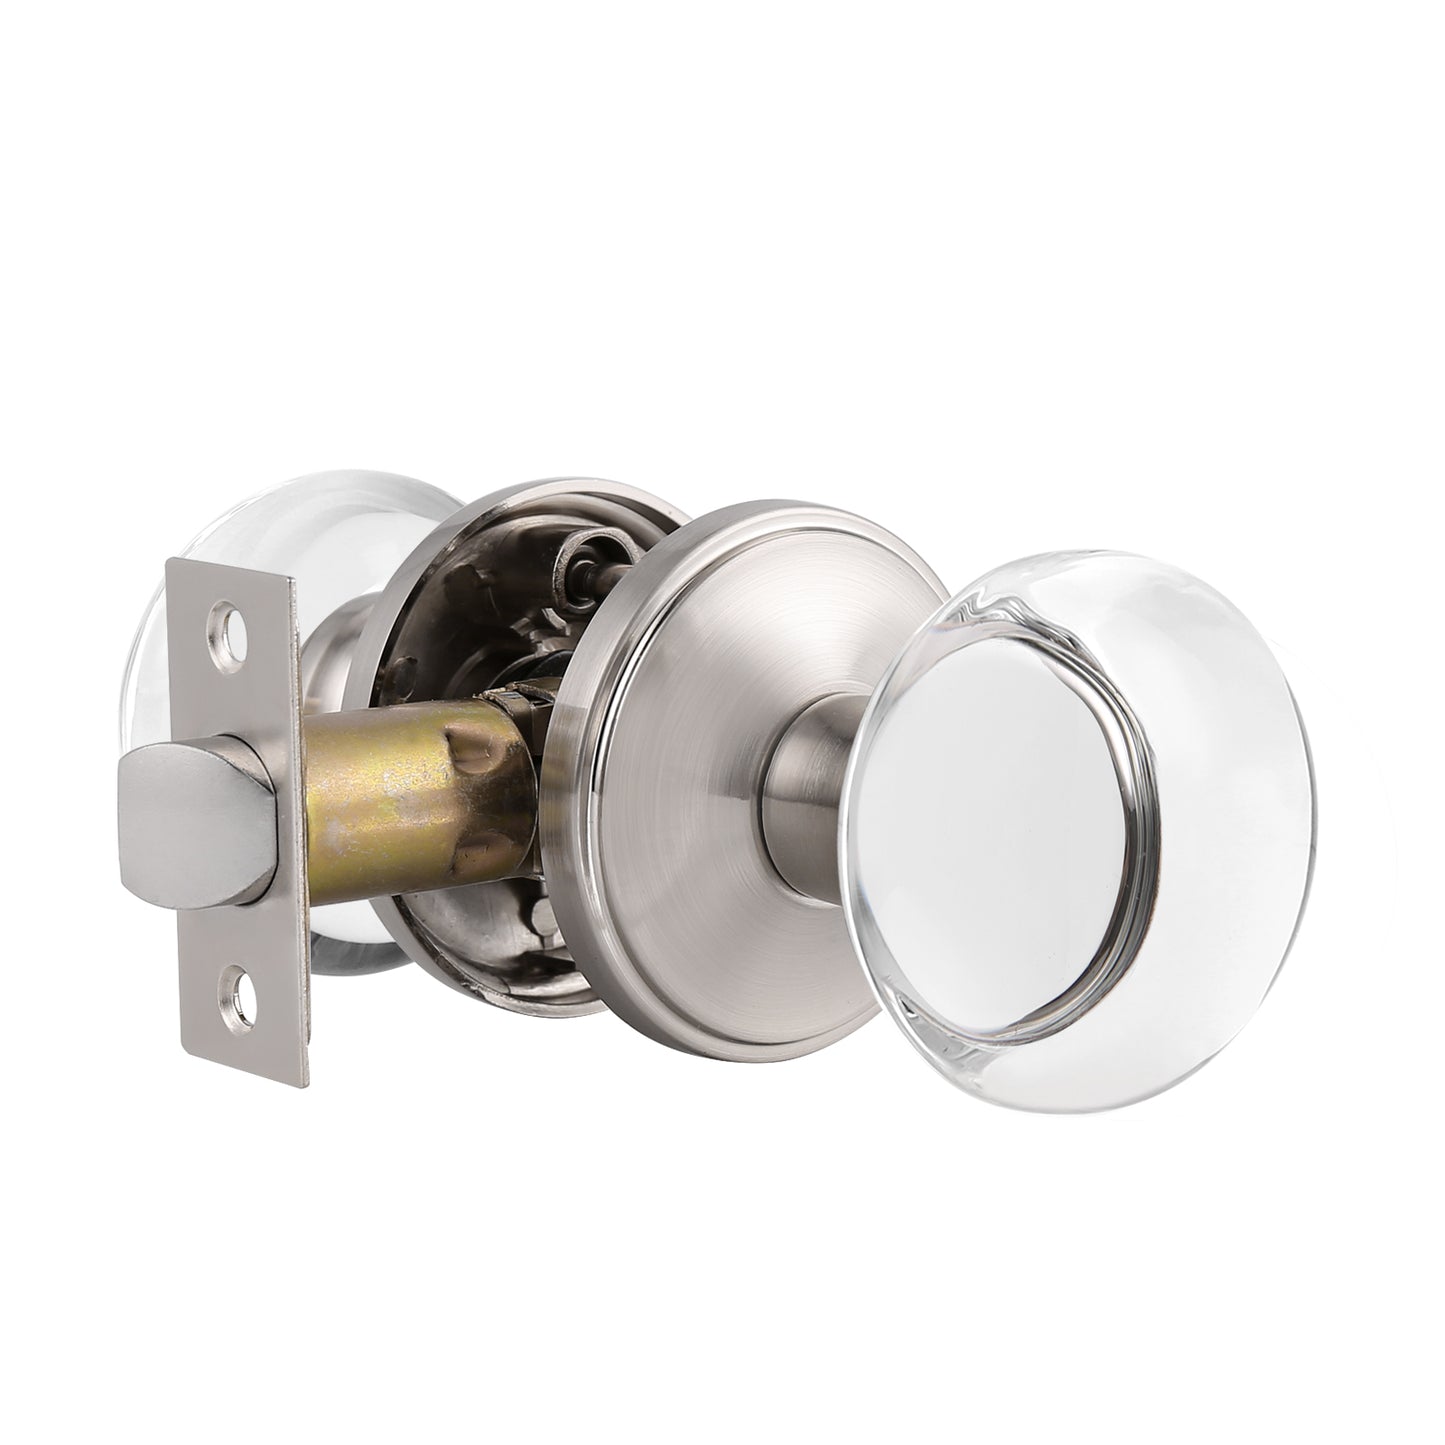 Round Glass Crystal Door Knobs with Satin Nickel Rosette, Privacy/Passage/Dummy Function DLC10BOSN - Probrico